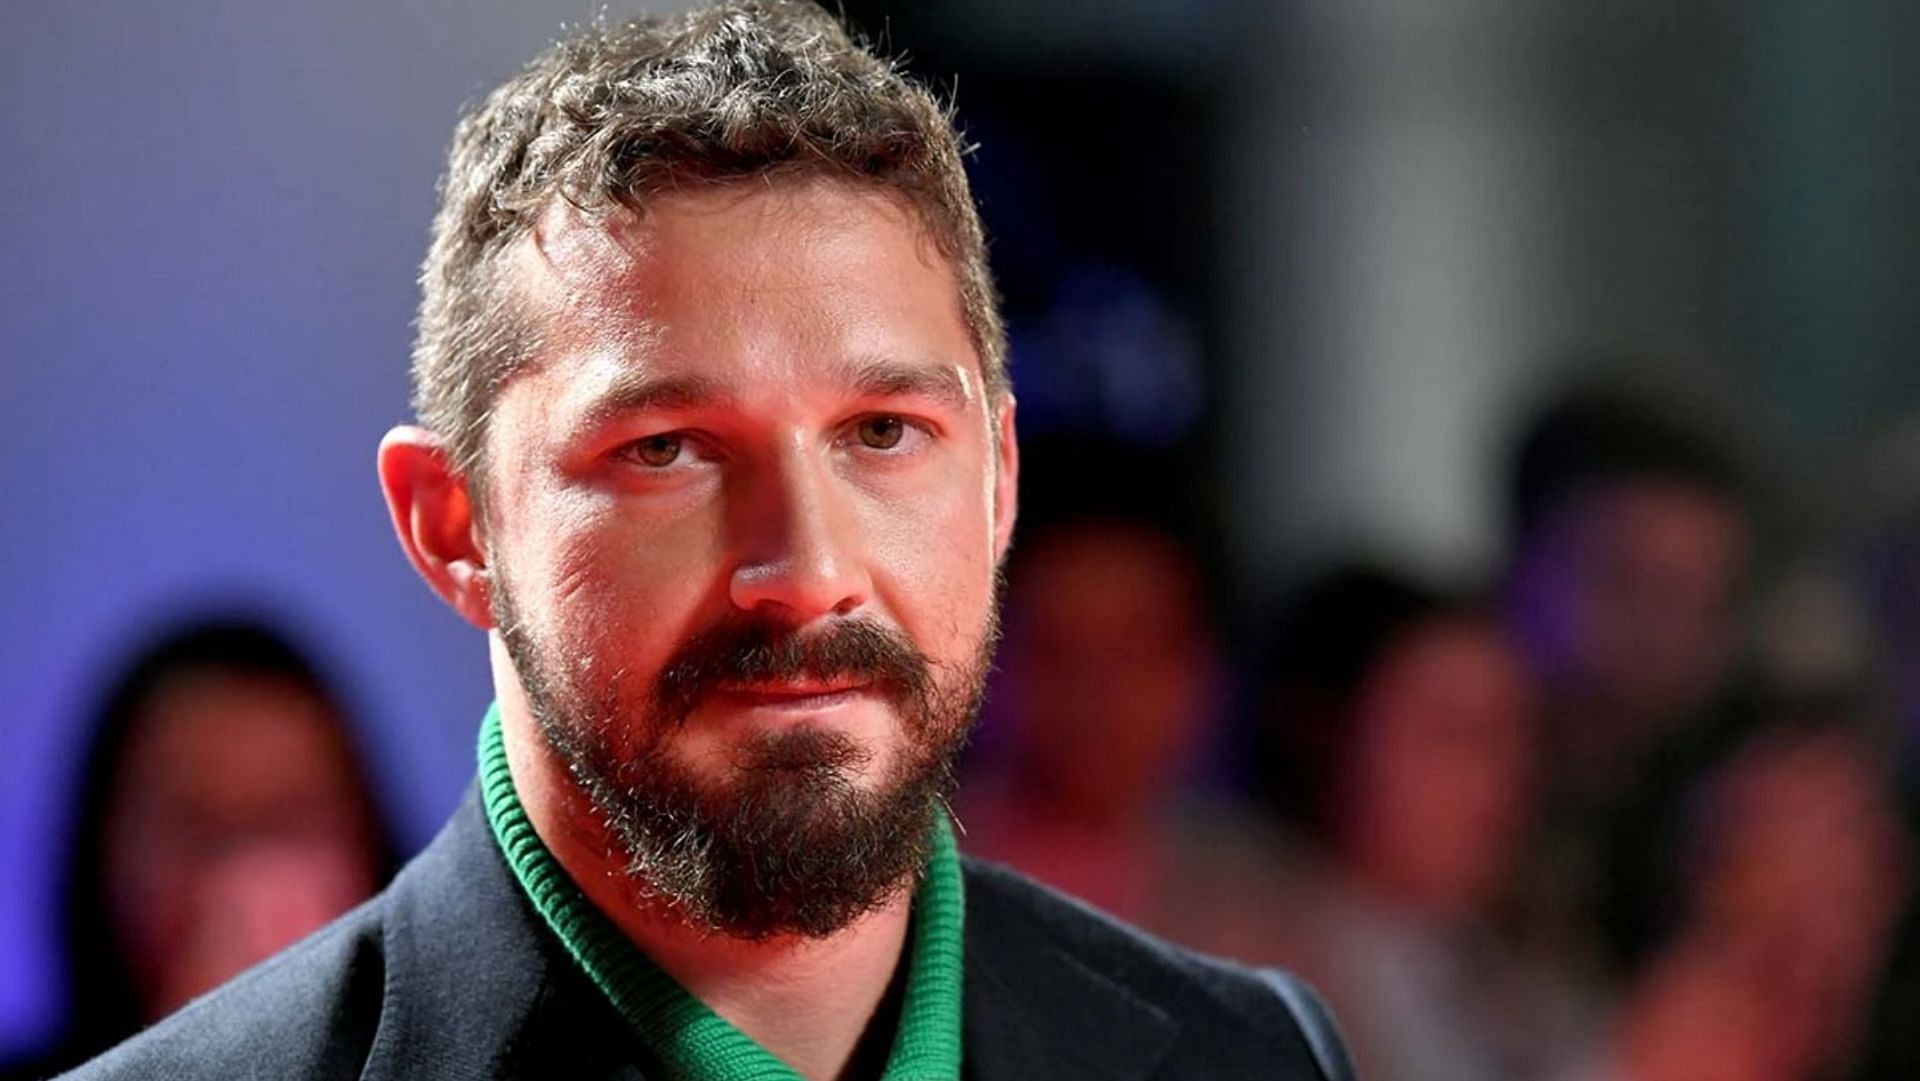 Shia LaBeouf faces sexual battery accusations from his ex-girlfriend, FKA Twigs. (Image via Kevin Winter/Getty)s